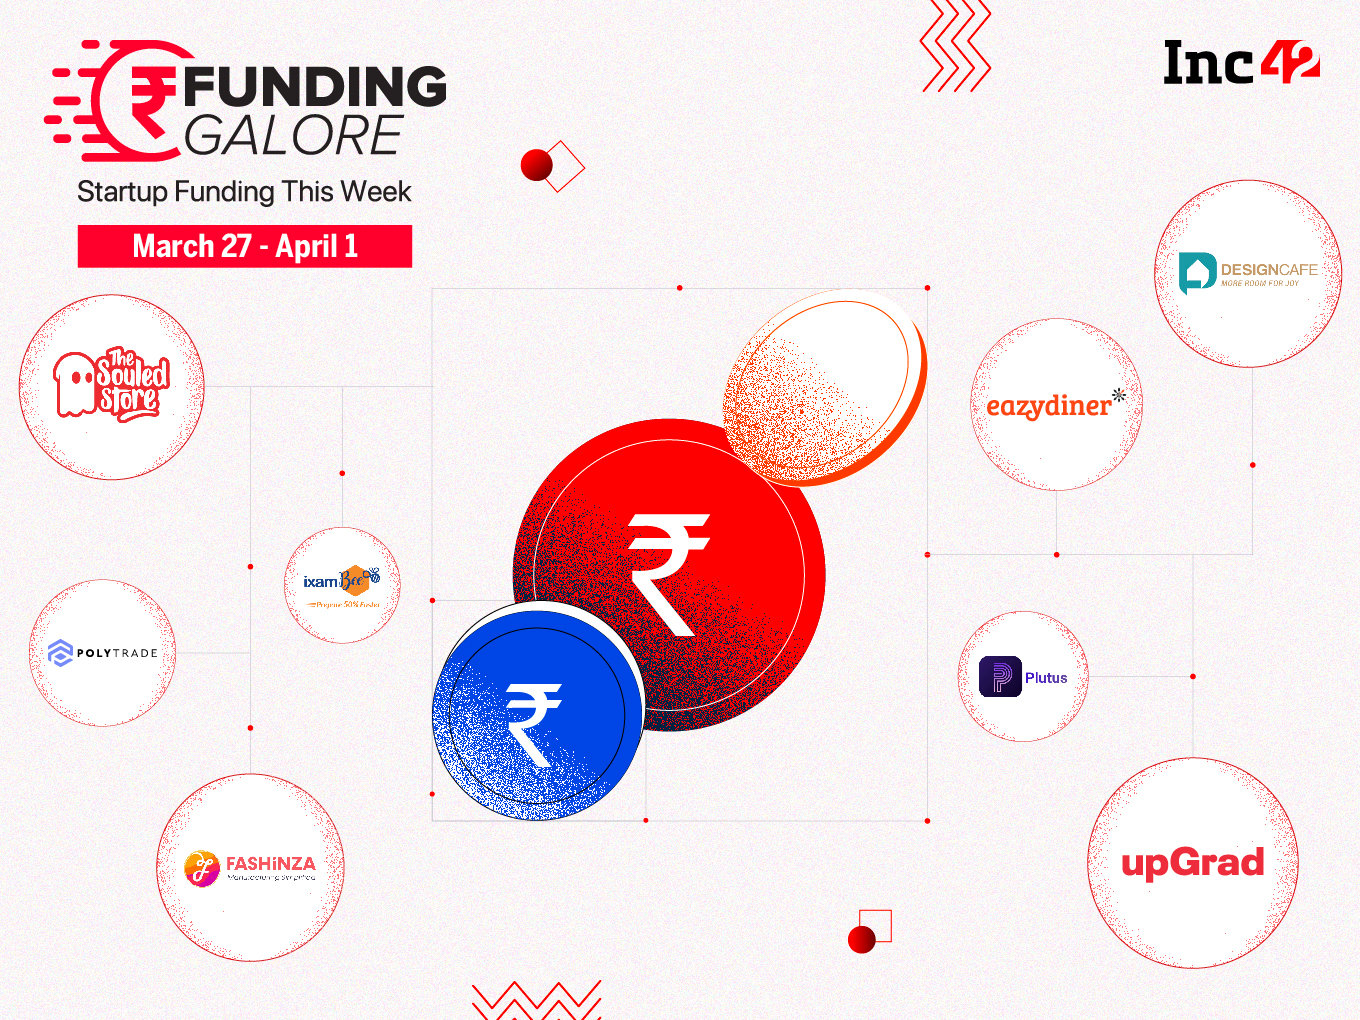 [Funding Galore] From upGrad To The Souled Store — Indian Startups Raised $102 Mn This Week